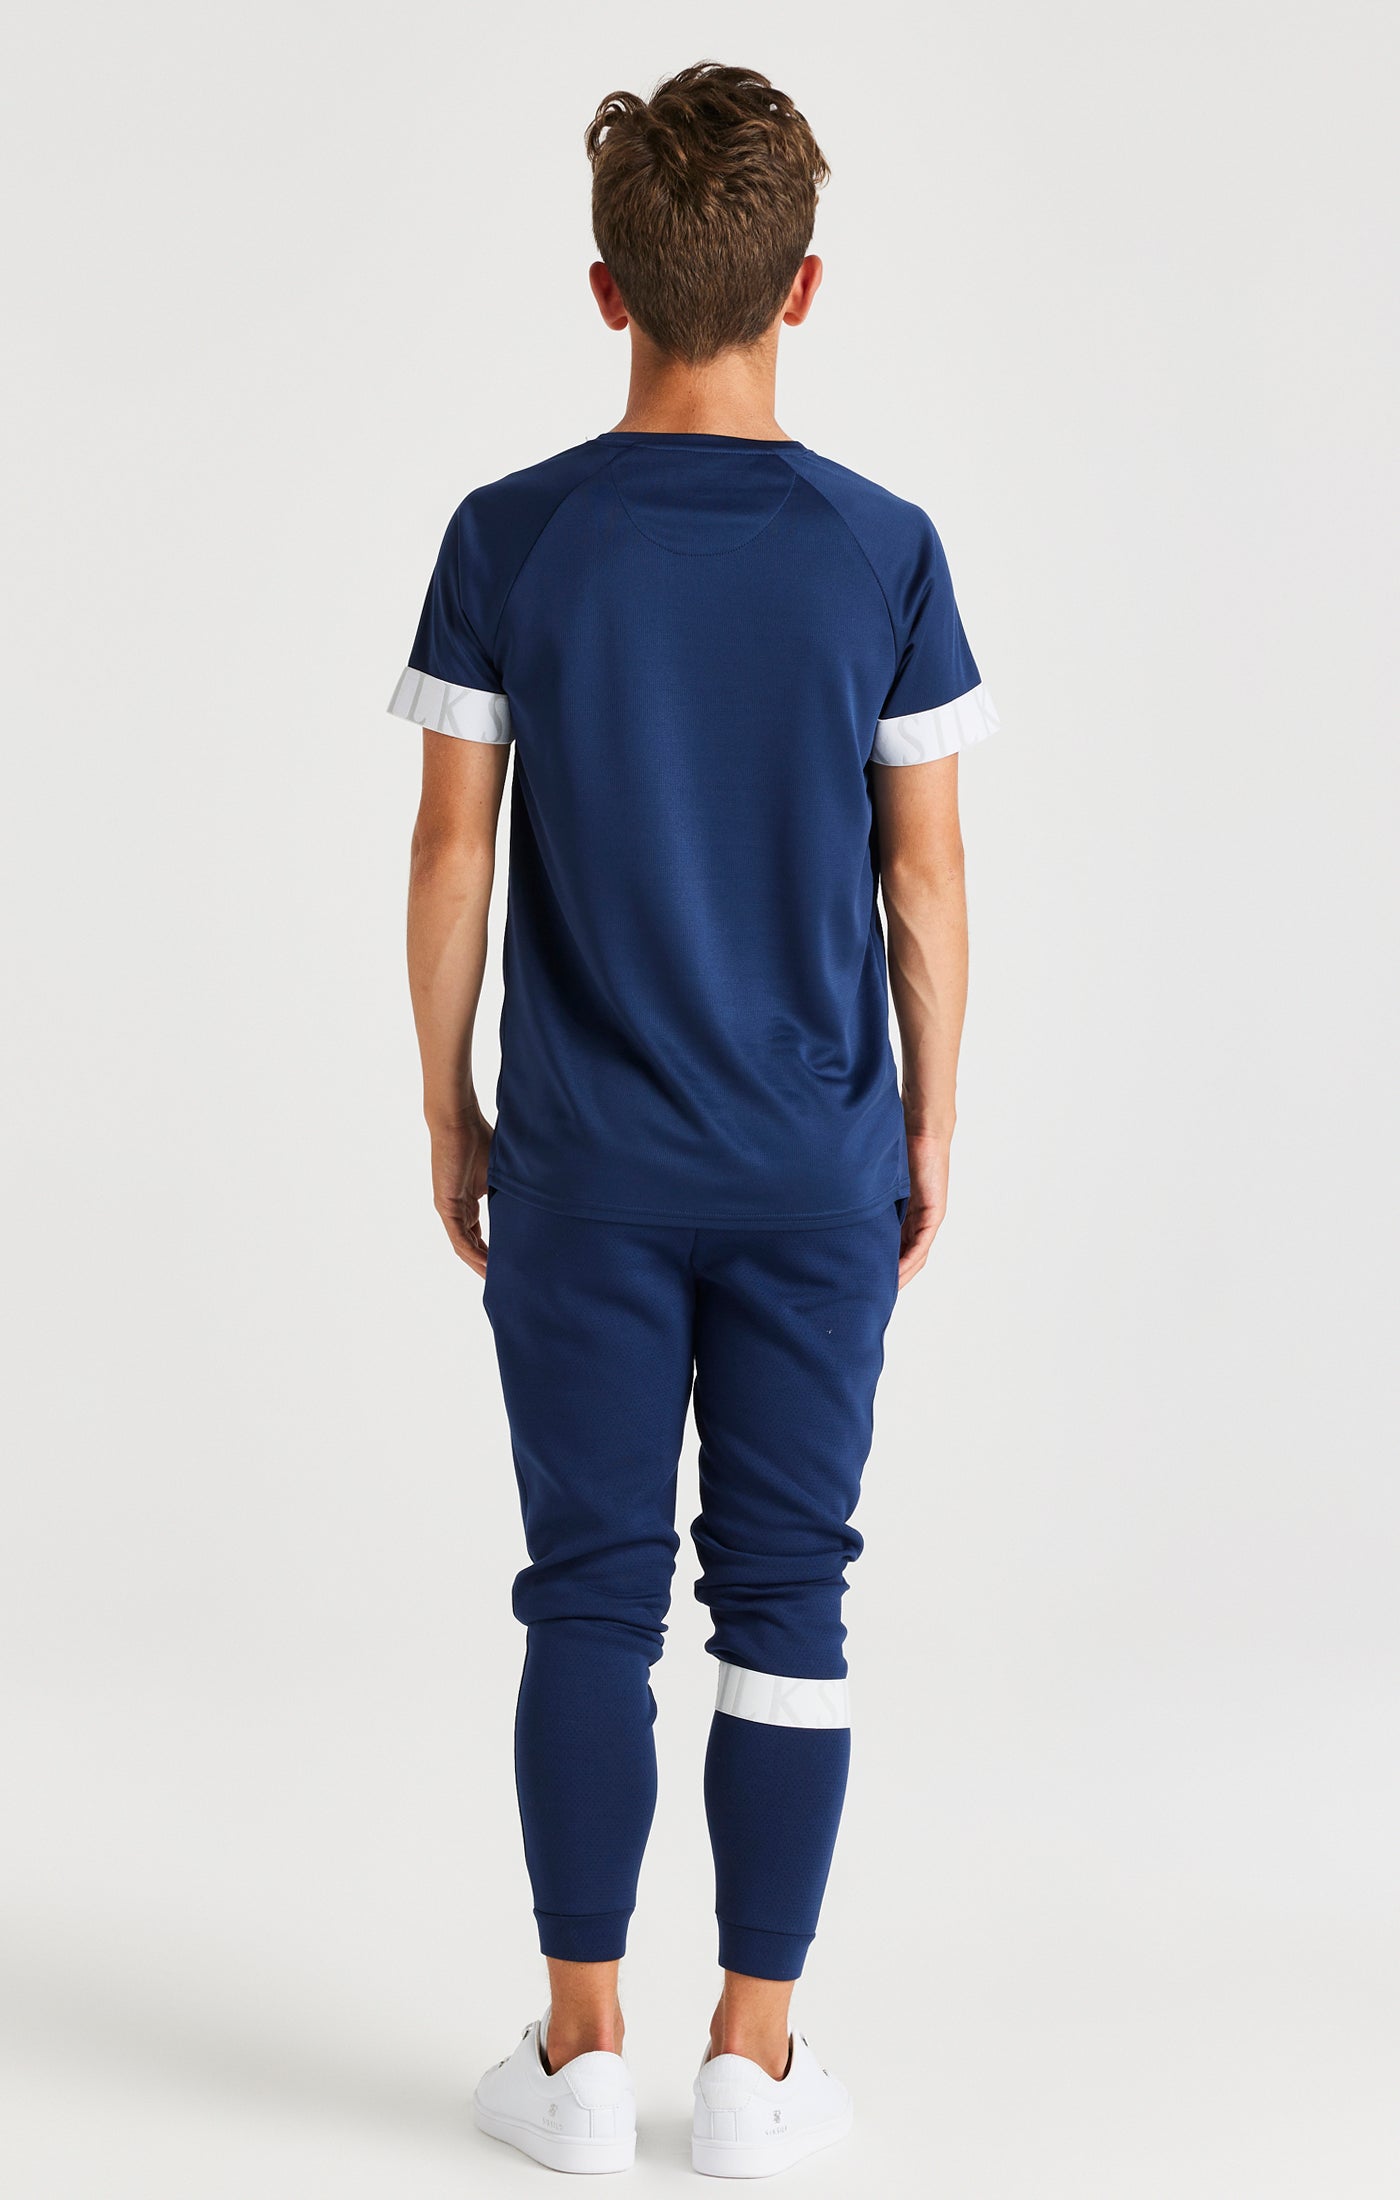 Load image into Gallery viewer, SikSilk Dynamic Tech Tee - Navy (4)